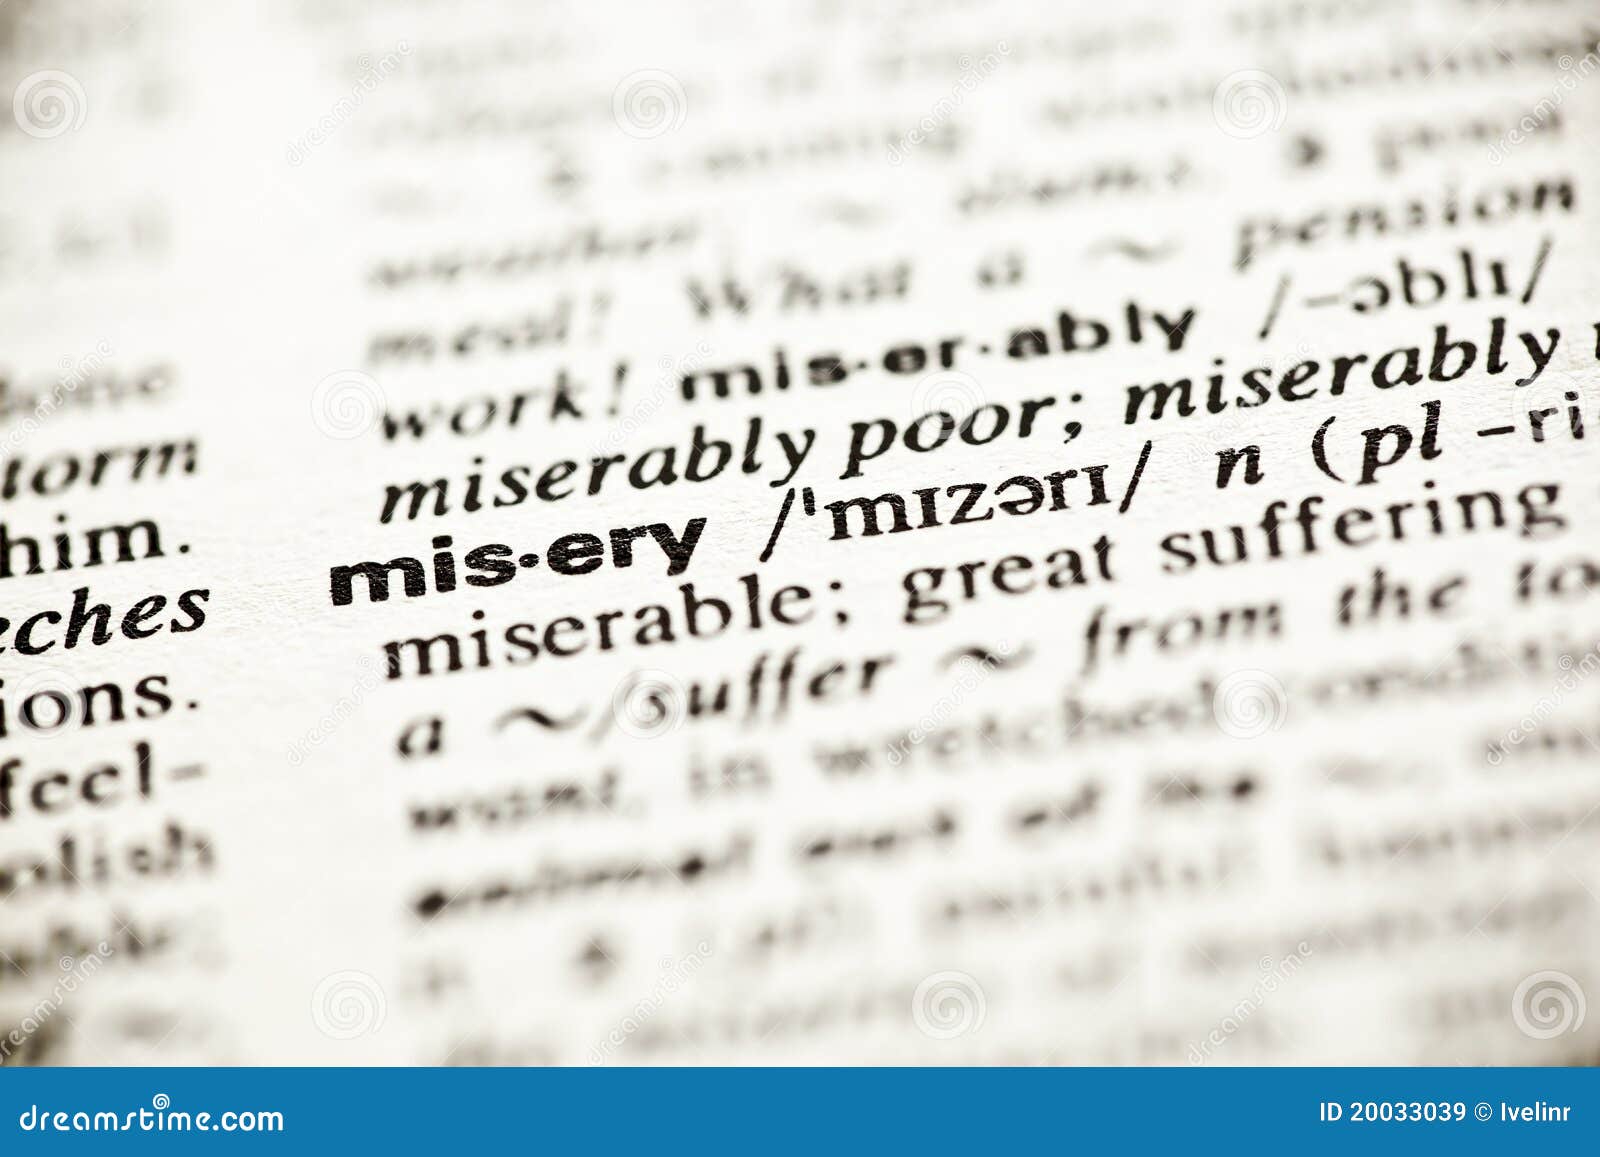 'misery' - dictionary definition vignette